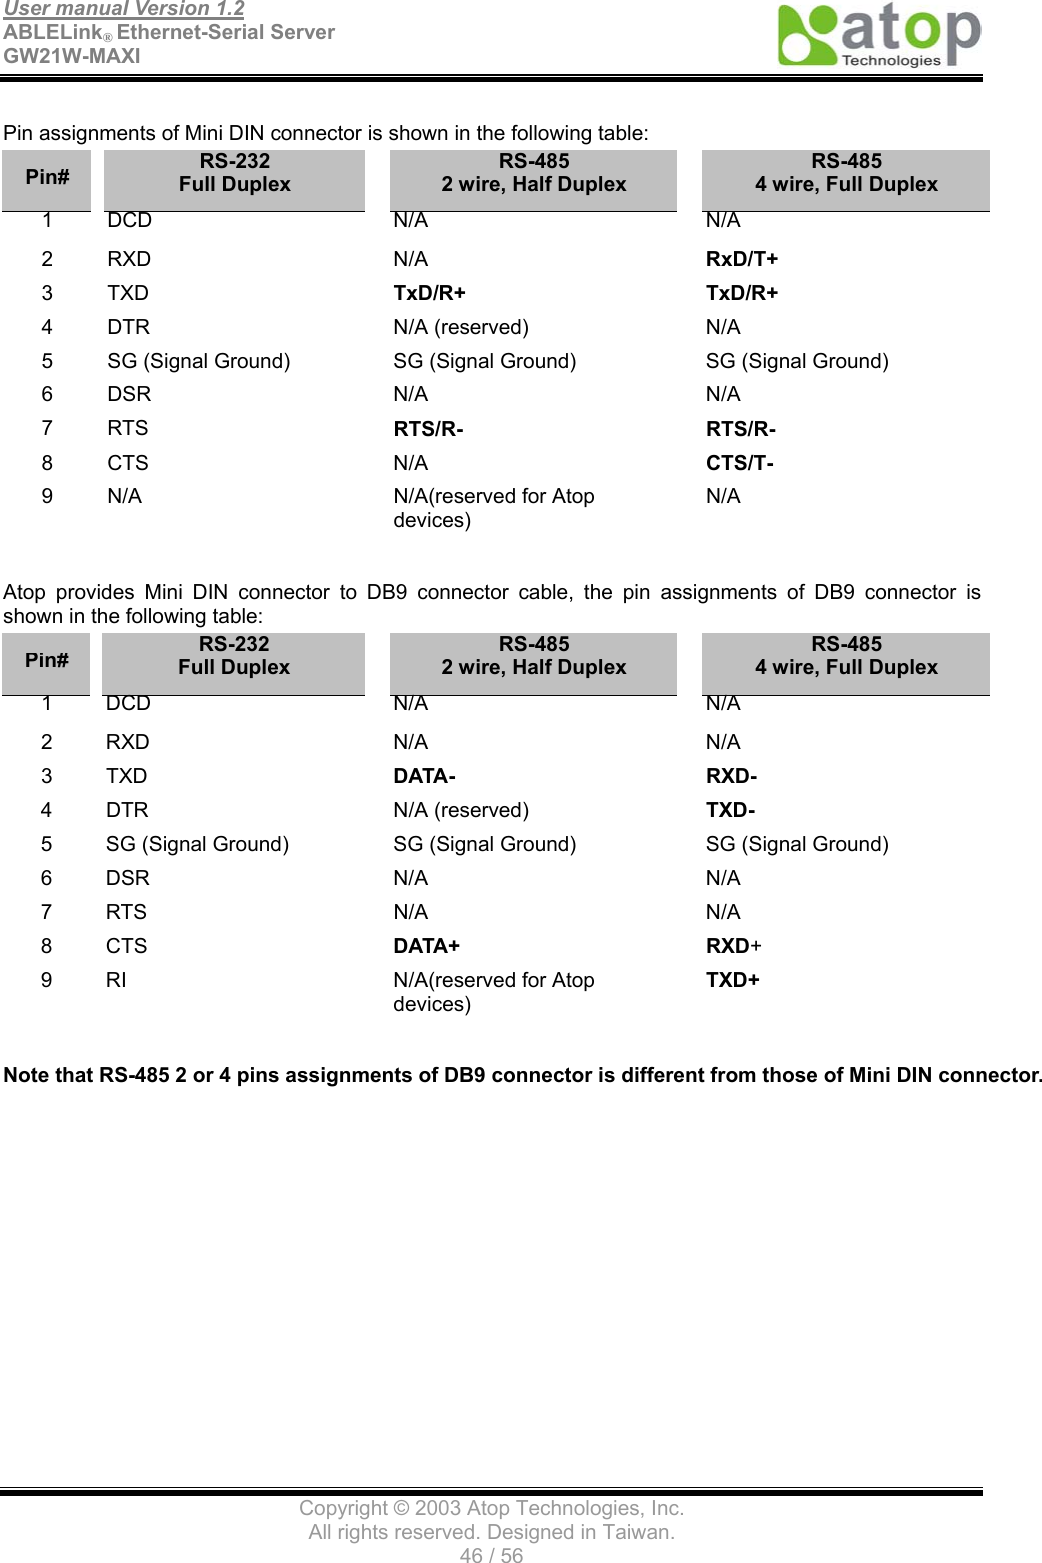 User manual Version 1.2 ABLELink® Ethernet-Serial Server   GW21W-MAXI                                      Copyright © 2003 Atop Technologies, Inc. All rights reserved. Designed in Taiwan. 46 / 56   Pin assignments of Mini DIN connector is shown in the following table:   Pin#   RS-232 Full Duplex  RS-485 2 wire, Half Duplex  RS-485 4 wire, Full Duplex 1   DCD   N/A   N/A 2  RXD   N/A   RxD/T+ 3  TXD   TxD/R+   TxD/R+ 4   DTR   N/A (reserved)   N/A  5    SG (Signal Ground)    SG (Signal Ground)    SG (Signal Ground) 6   DSR   N/A   N/A 7  RTS   RTS/R-   RTS/R- 8  CTS   N/A   CTS/T- 9    N/A    N/A(reserved for Atop devices)  N/A  Atop provides Mini DIN connector to DB9 connector cable, the pin assignments of DB9 connector is shown in the following table: Pin#   RS-232 Full Duplex  RS-485 2 wire, Half Duplex  RS-485 4 wire, Full Duplex 1   DCD   N/A   N/A 2   RXD   N/A   N/A 3  TXD   DATA-   RXD- 4  DTR   N/A (reserved)   TXD-  5    SG (Signal Ground)    SG (Signal Ground)    SG (Signal Ground) 6   DSR   N/A   N/A 7   RTS   N/A   N/A 8  CTS   DATA+  RXD+ 9    RI    N/A(reserved for Atop devices)  TXD+  Note that RS-485 2 or 4 pins assignments of DB9 connector is different from those of Mini DIN connector. 